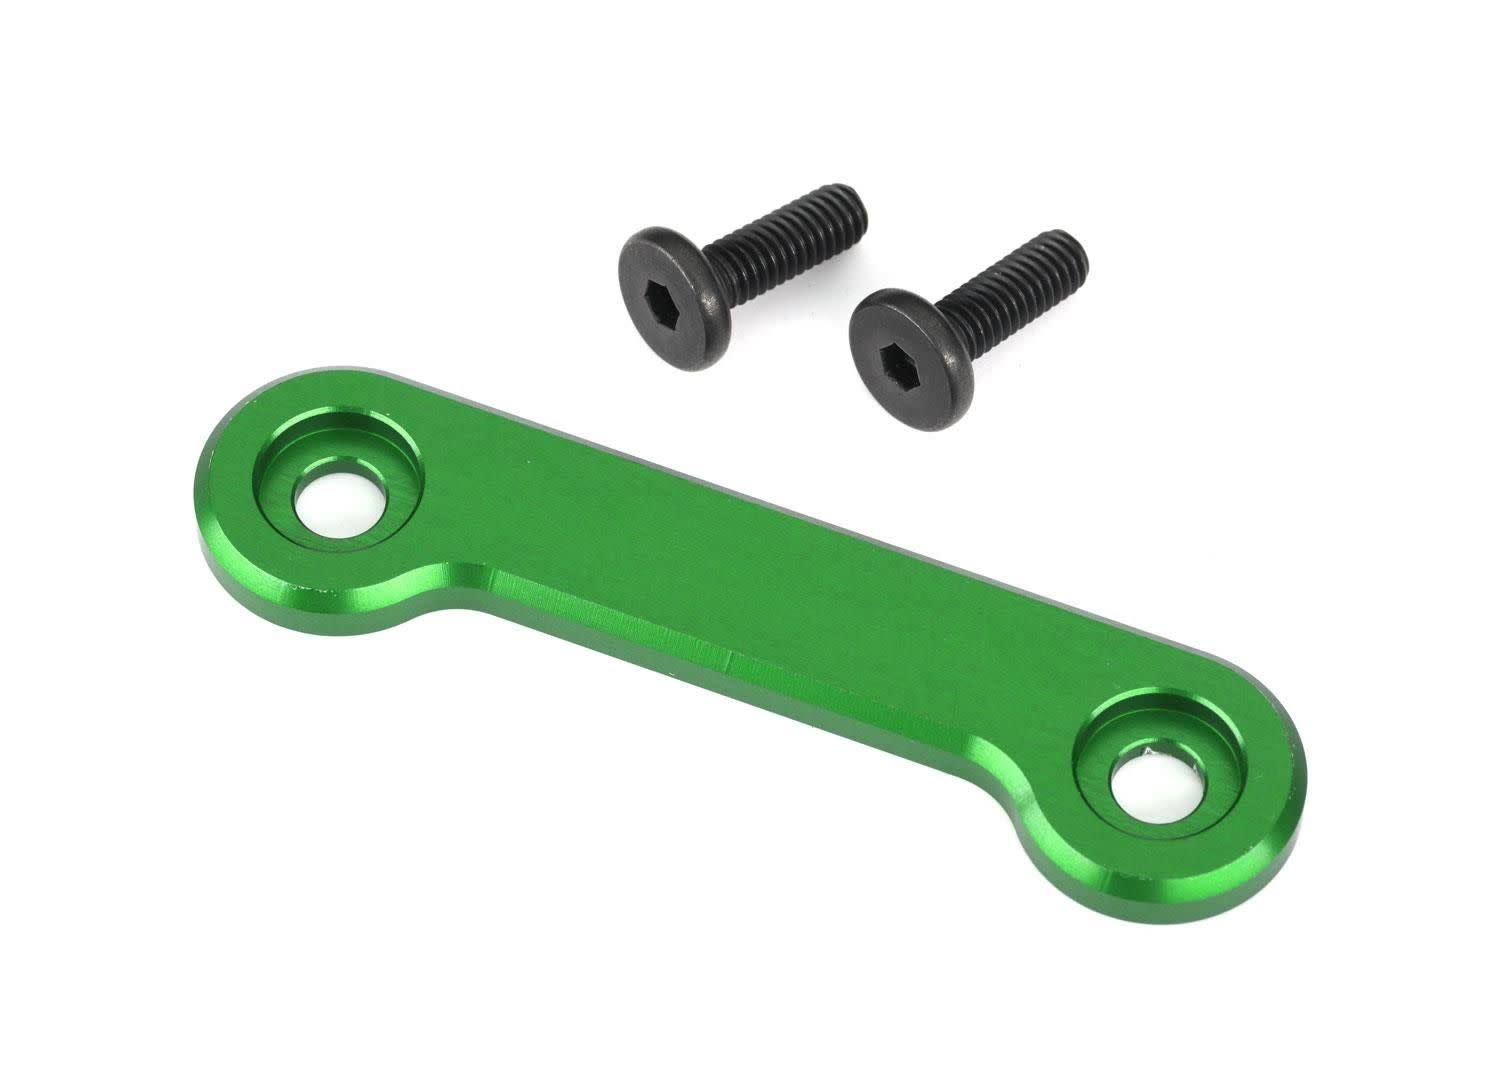 Traxxas 9617G Wing Washer, 6061-T6 Aluminum (green-anodized) (1)/ 4x12mm FCS (2)